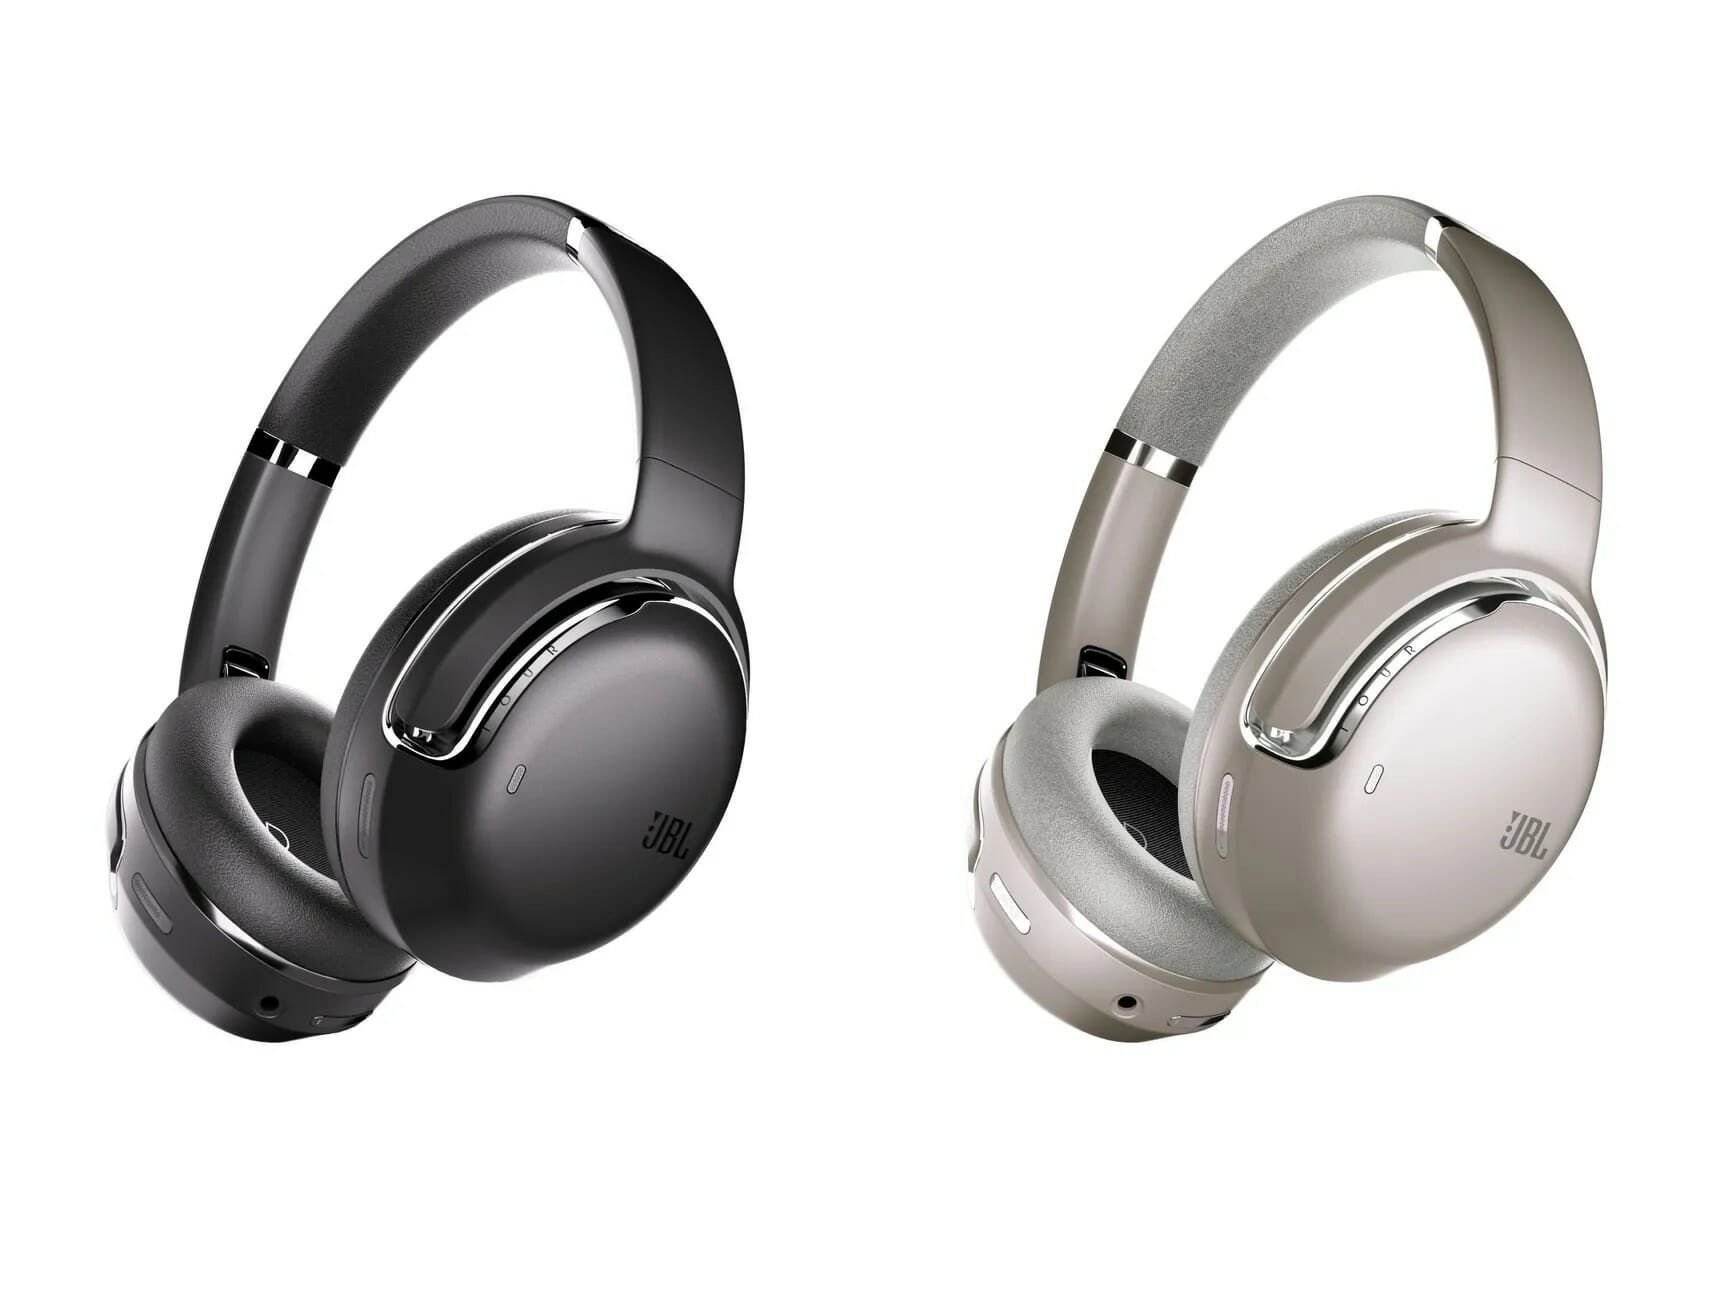 JBL presented new TWS headphones with a touch display on the case